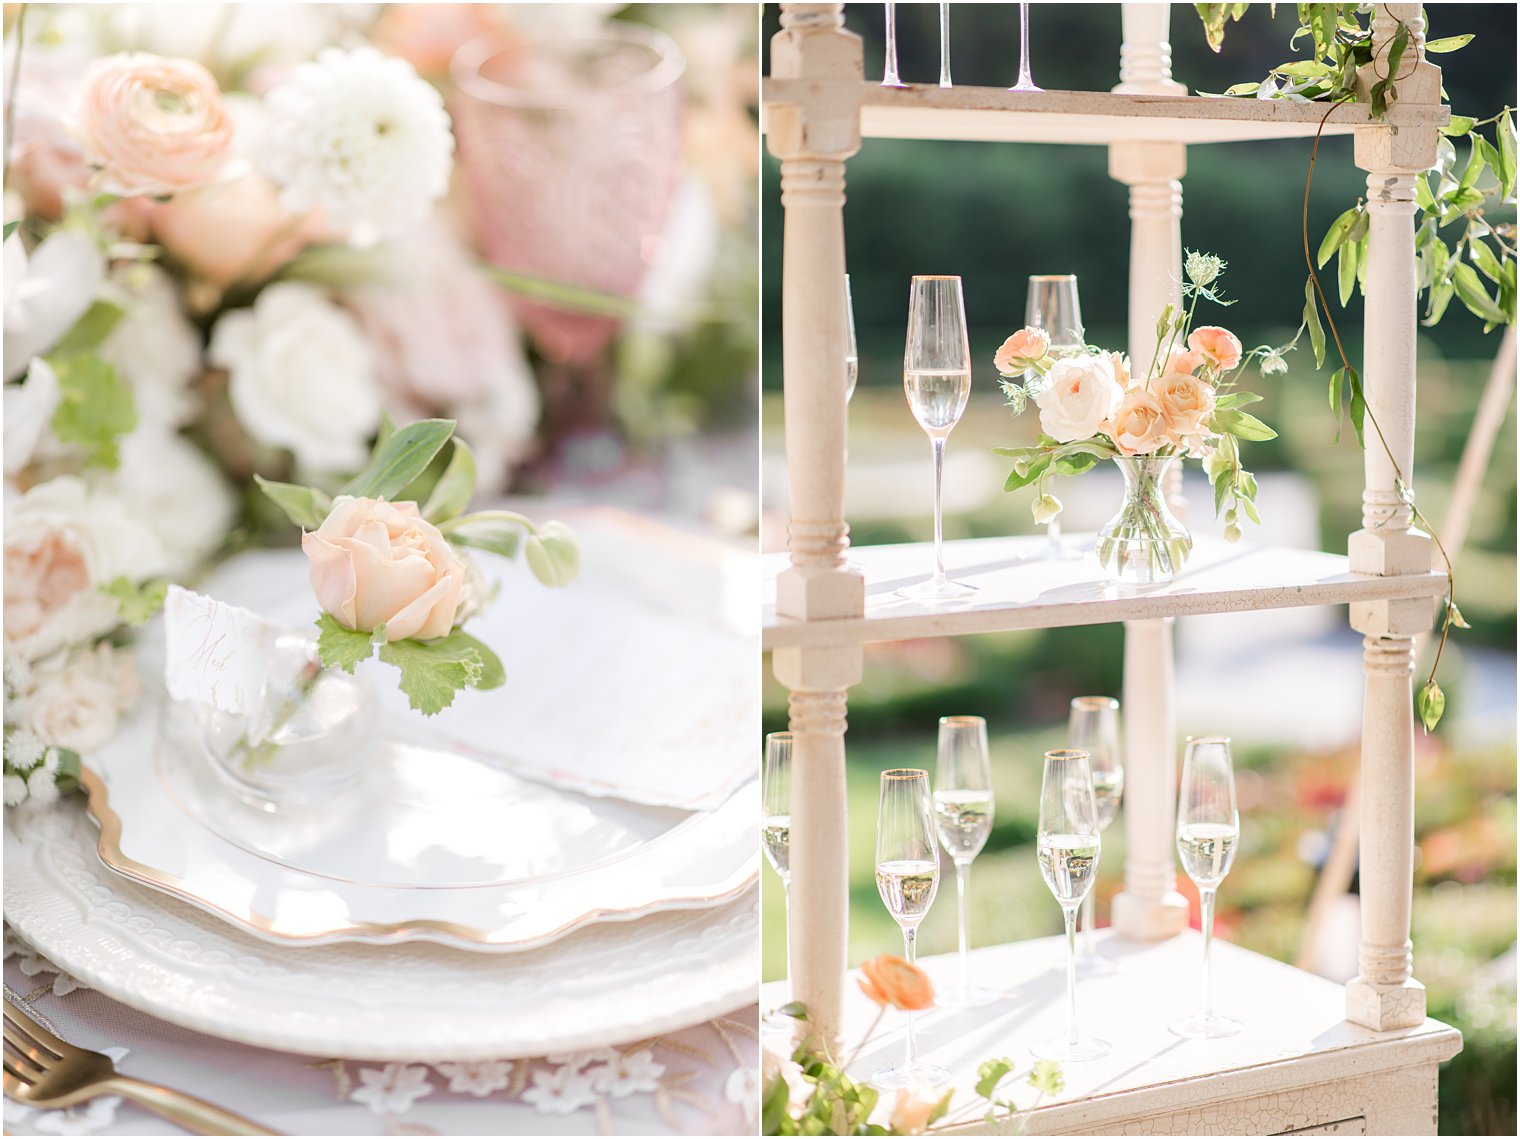 Romantic peach and cream wedding florals by Rosaspina Florist | Wedding at Park Chateau Estate